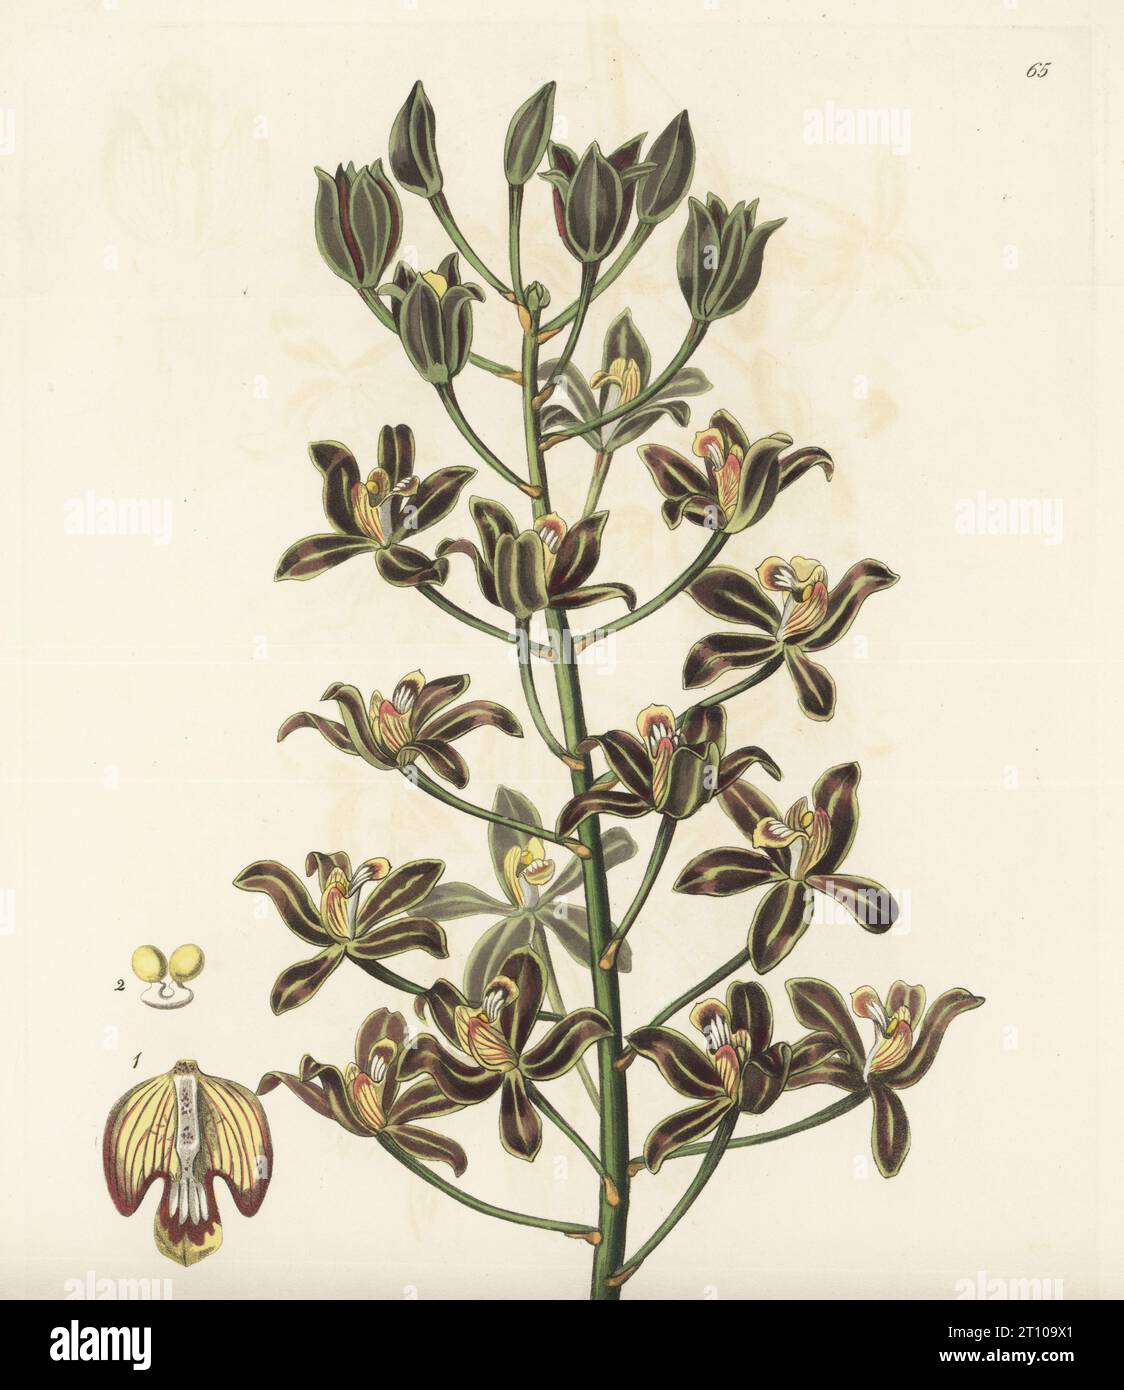 Many-flowered letter-leaf orchid or multiflowered grammatophyllum, Grammatophyllum multiflorum. Native to the Philippines, and sent from Manila by plant hunter Hugh Cuming. Handcoloured copperplate engraving by George Barclay after a botanical illustration by Sarah Drake from Edwards’ Botanical Register, edited by John Lindley, published by James Ridgway, London, 1839. Stock Photo